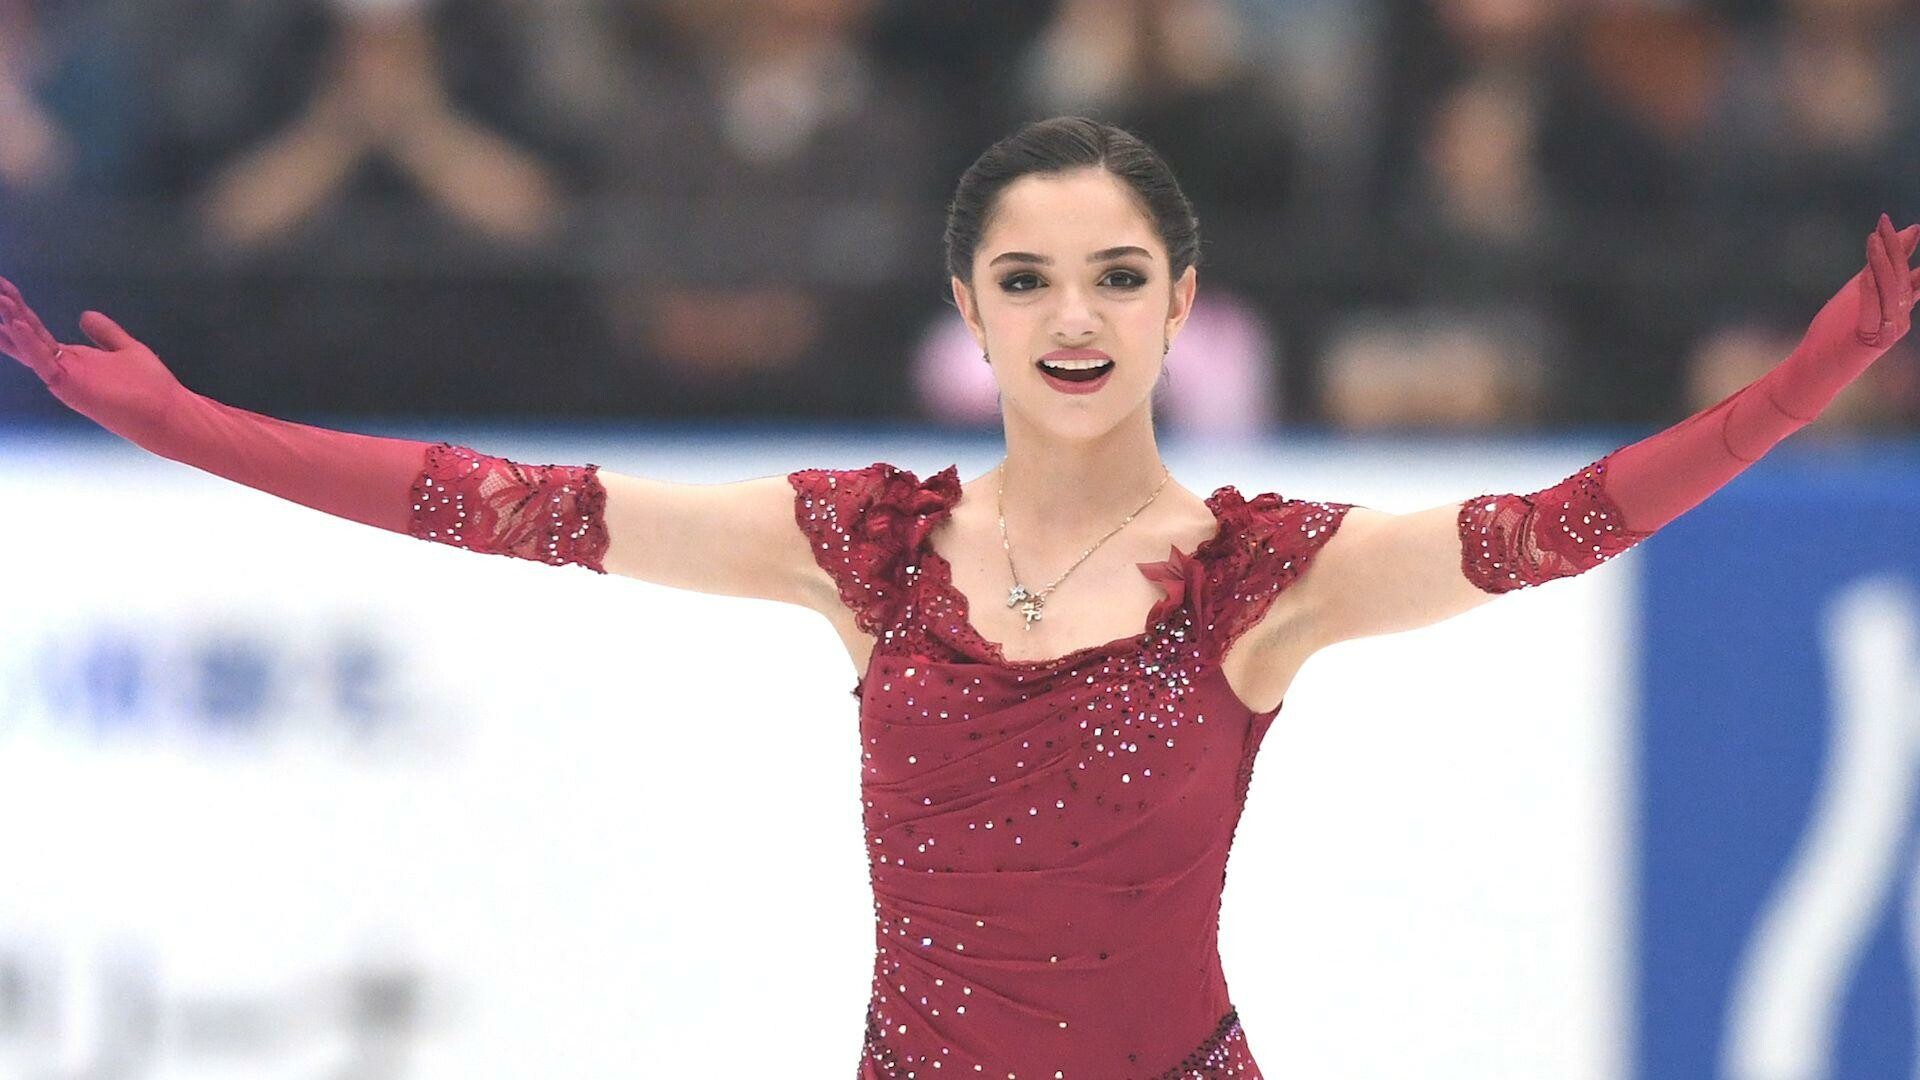 Evgenia Medvedeva: The first female skater to surpass the 230-point and the 240-point total mark. 1920x1080 Full HD Wallpaper.